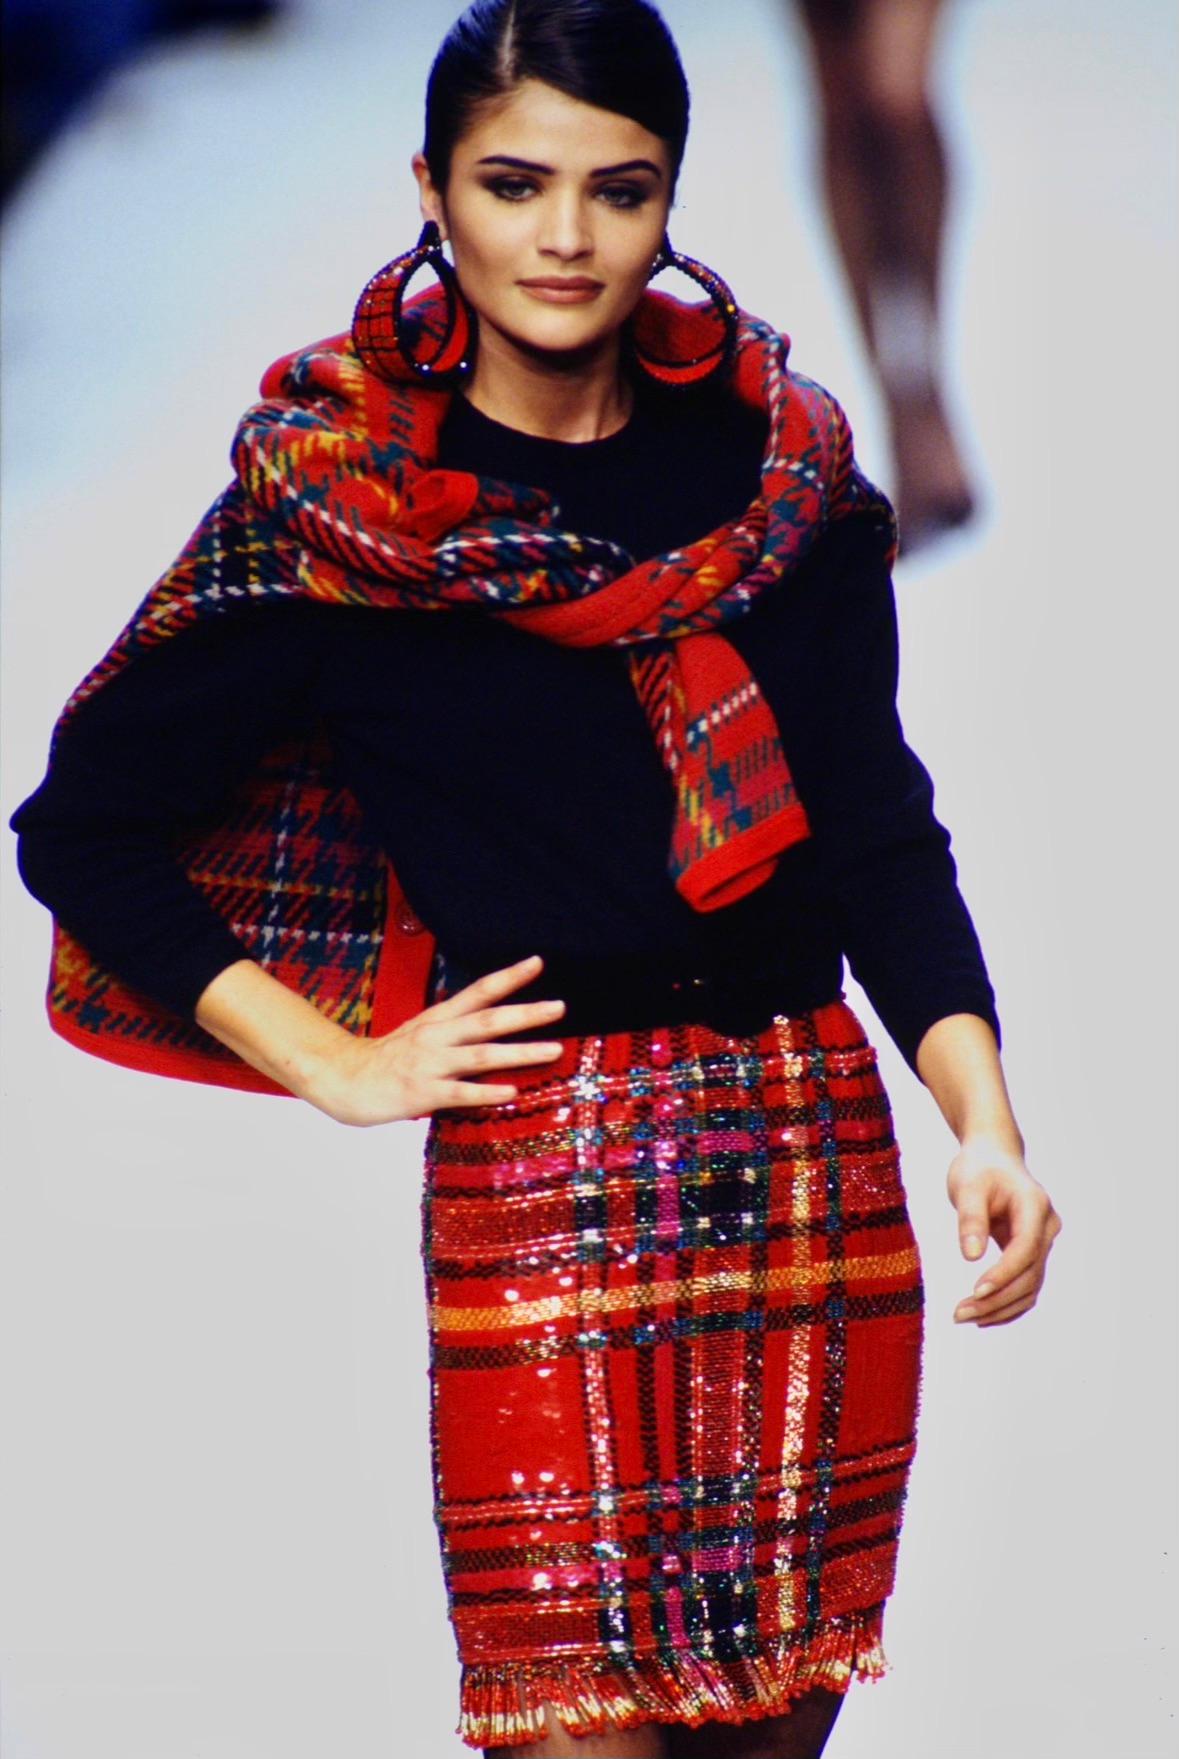 Presenting a stunning Oscar de La Renta red and green sequin tartan fringe skirt perfect for the holidays! Designed for the Fall/Winter 1991 collection, this captivating skirt debuted in the season's runway presentation on Helena Christensen. The